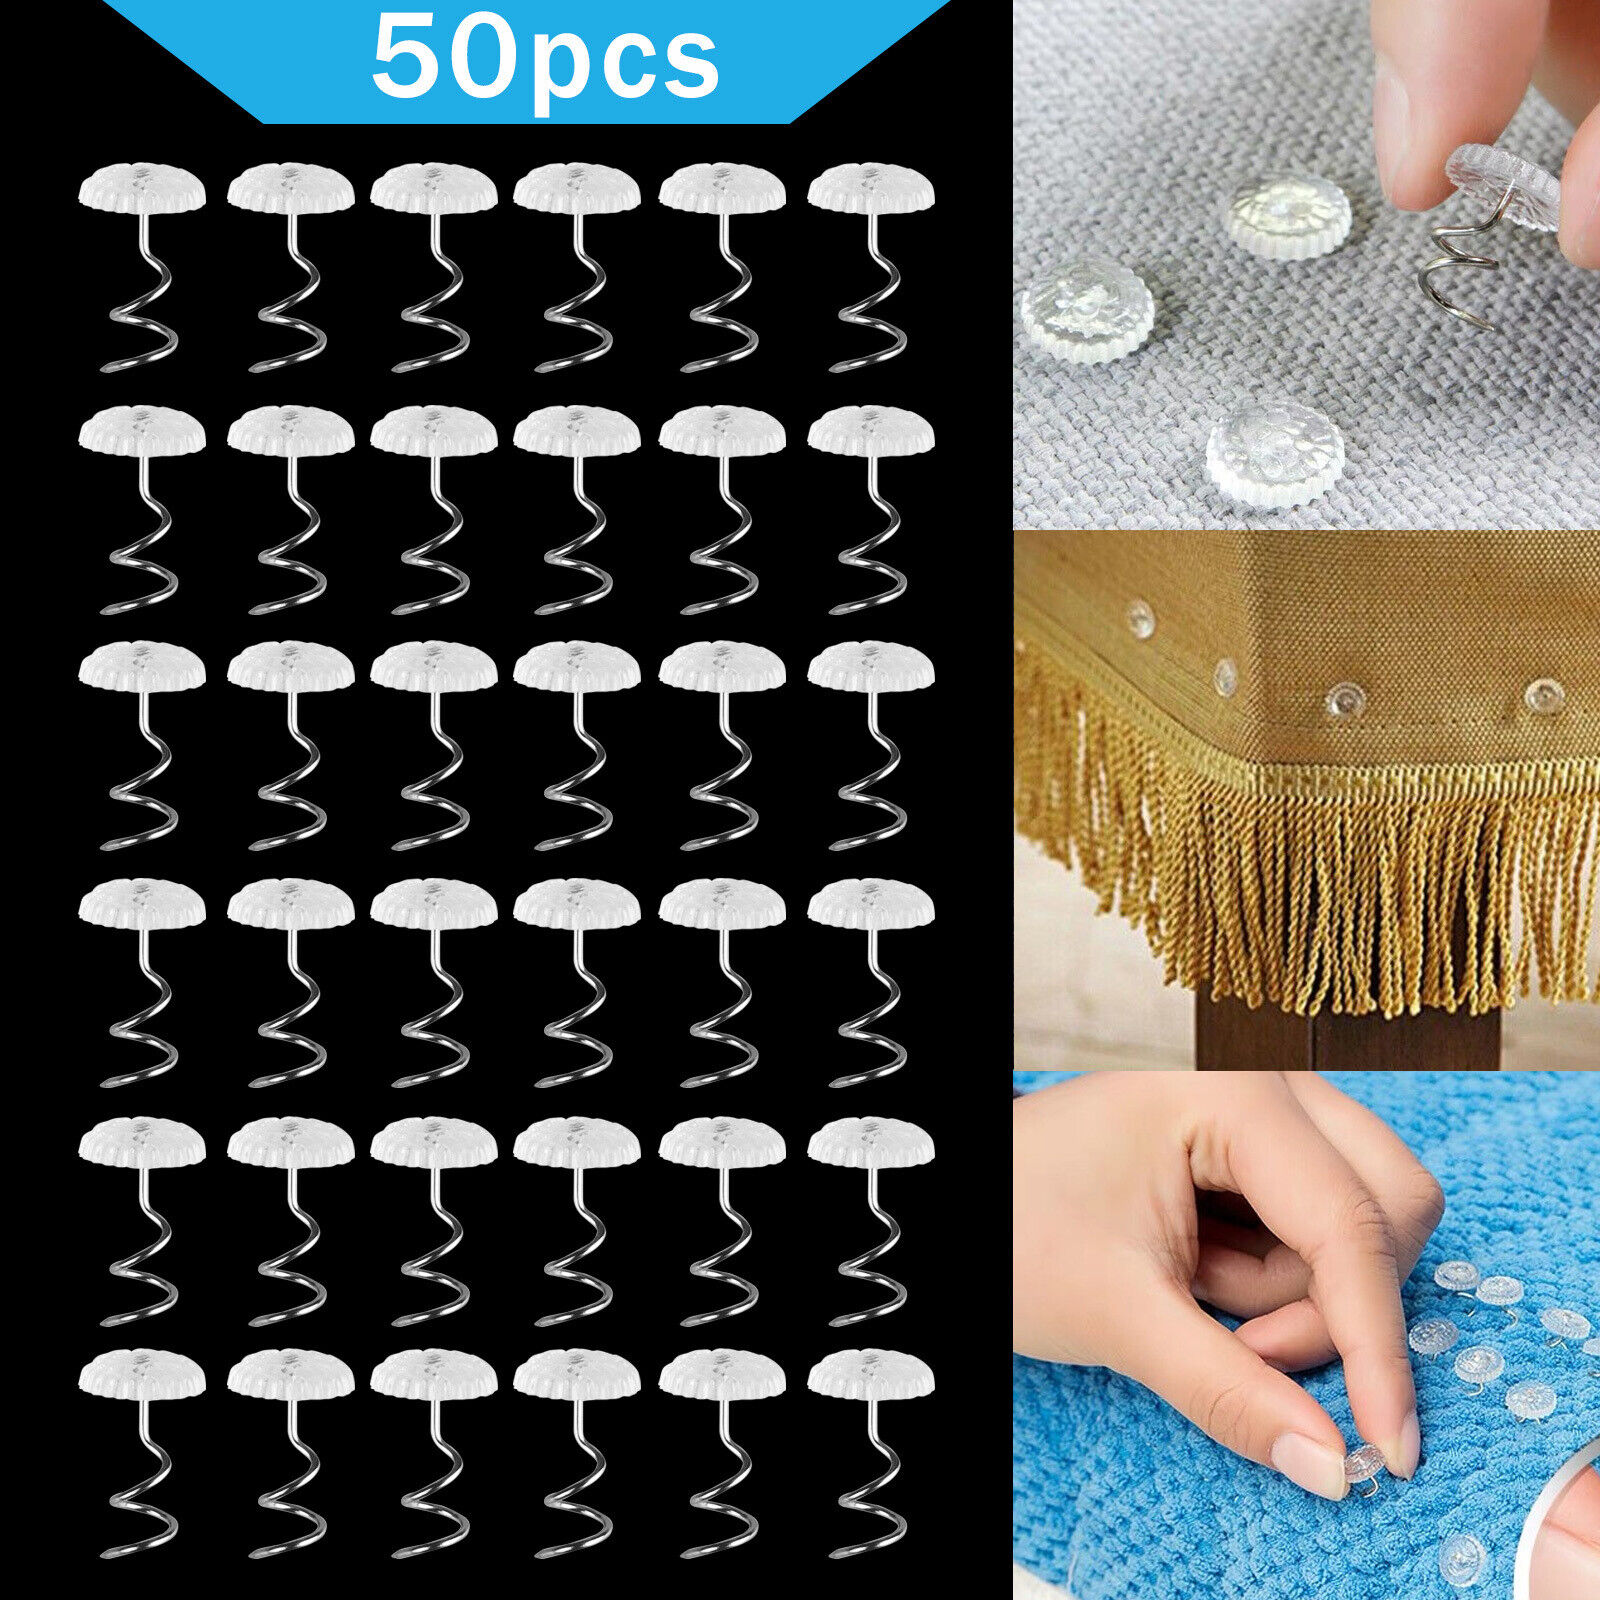 50pcs Headliner Twist Pins Kit For Upholstery Fabric Sofa Chair Repair Crafts US